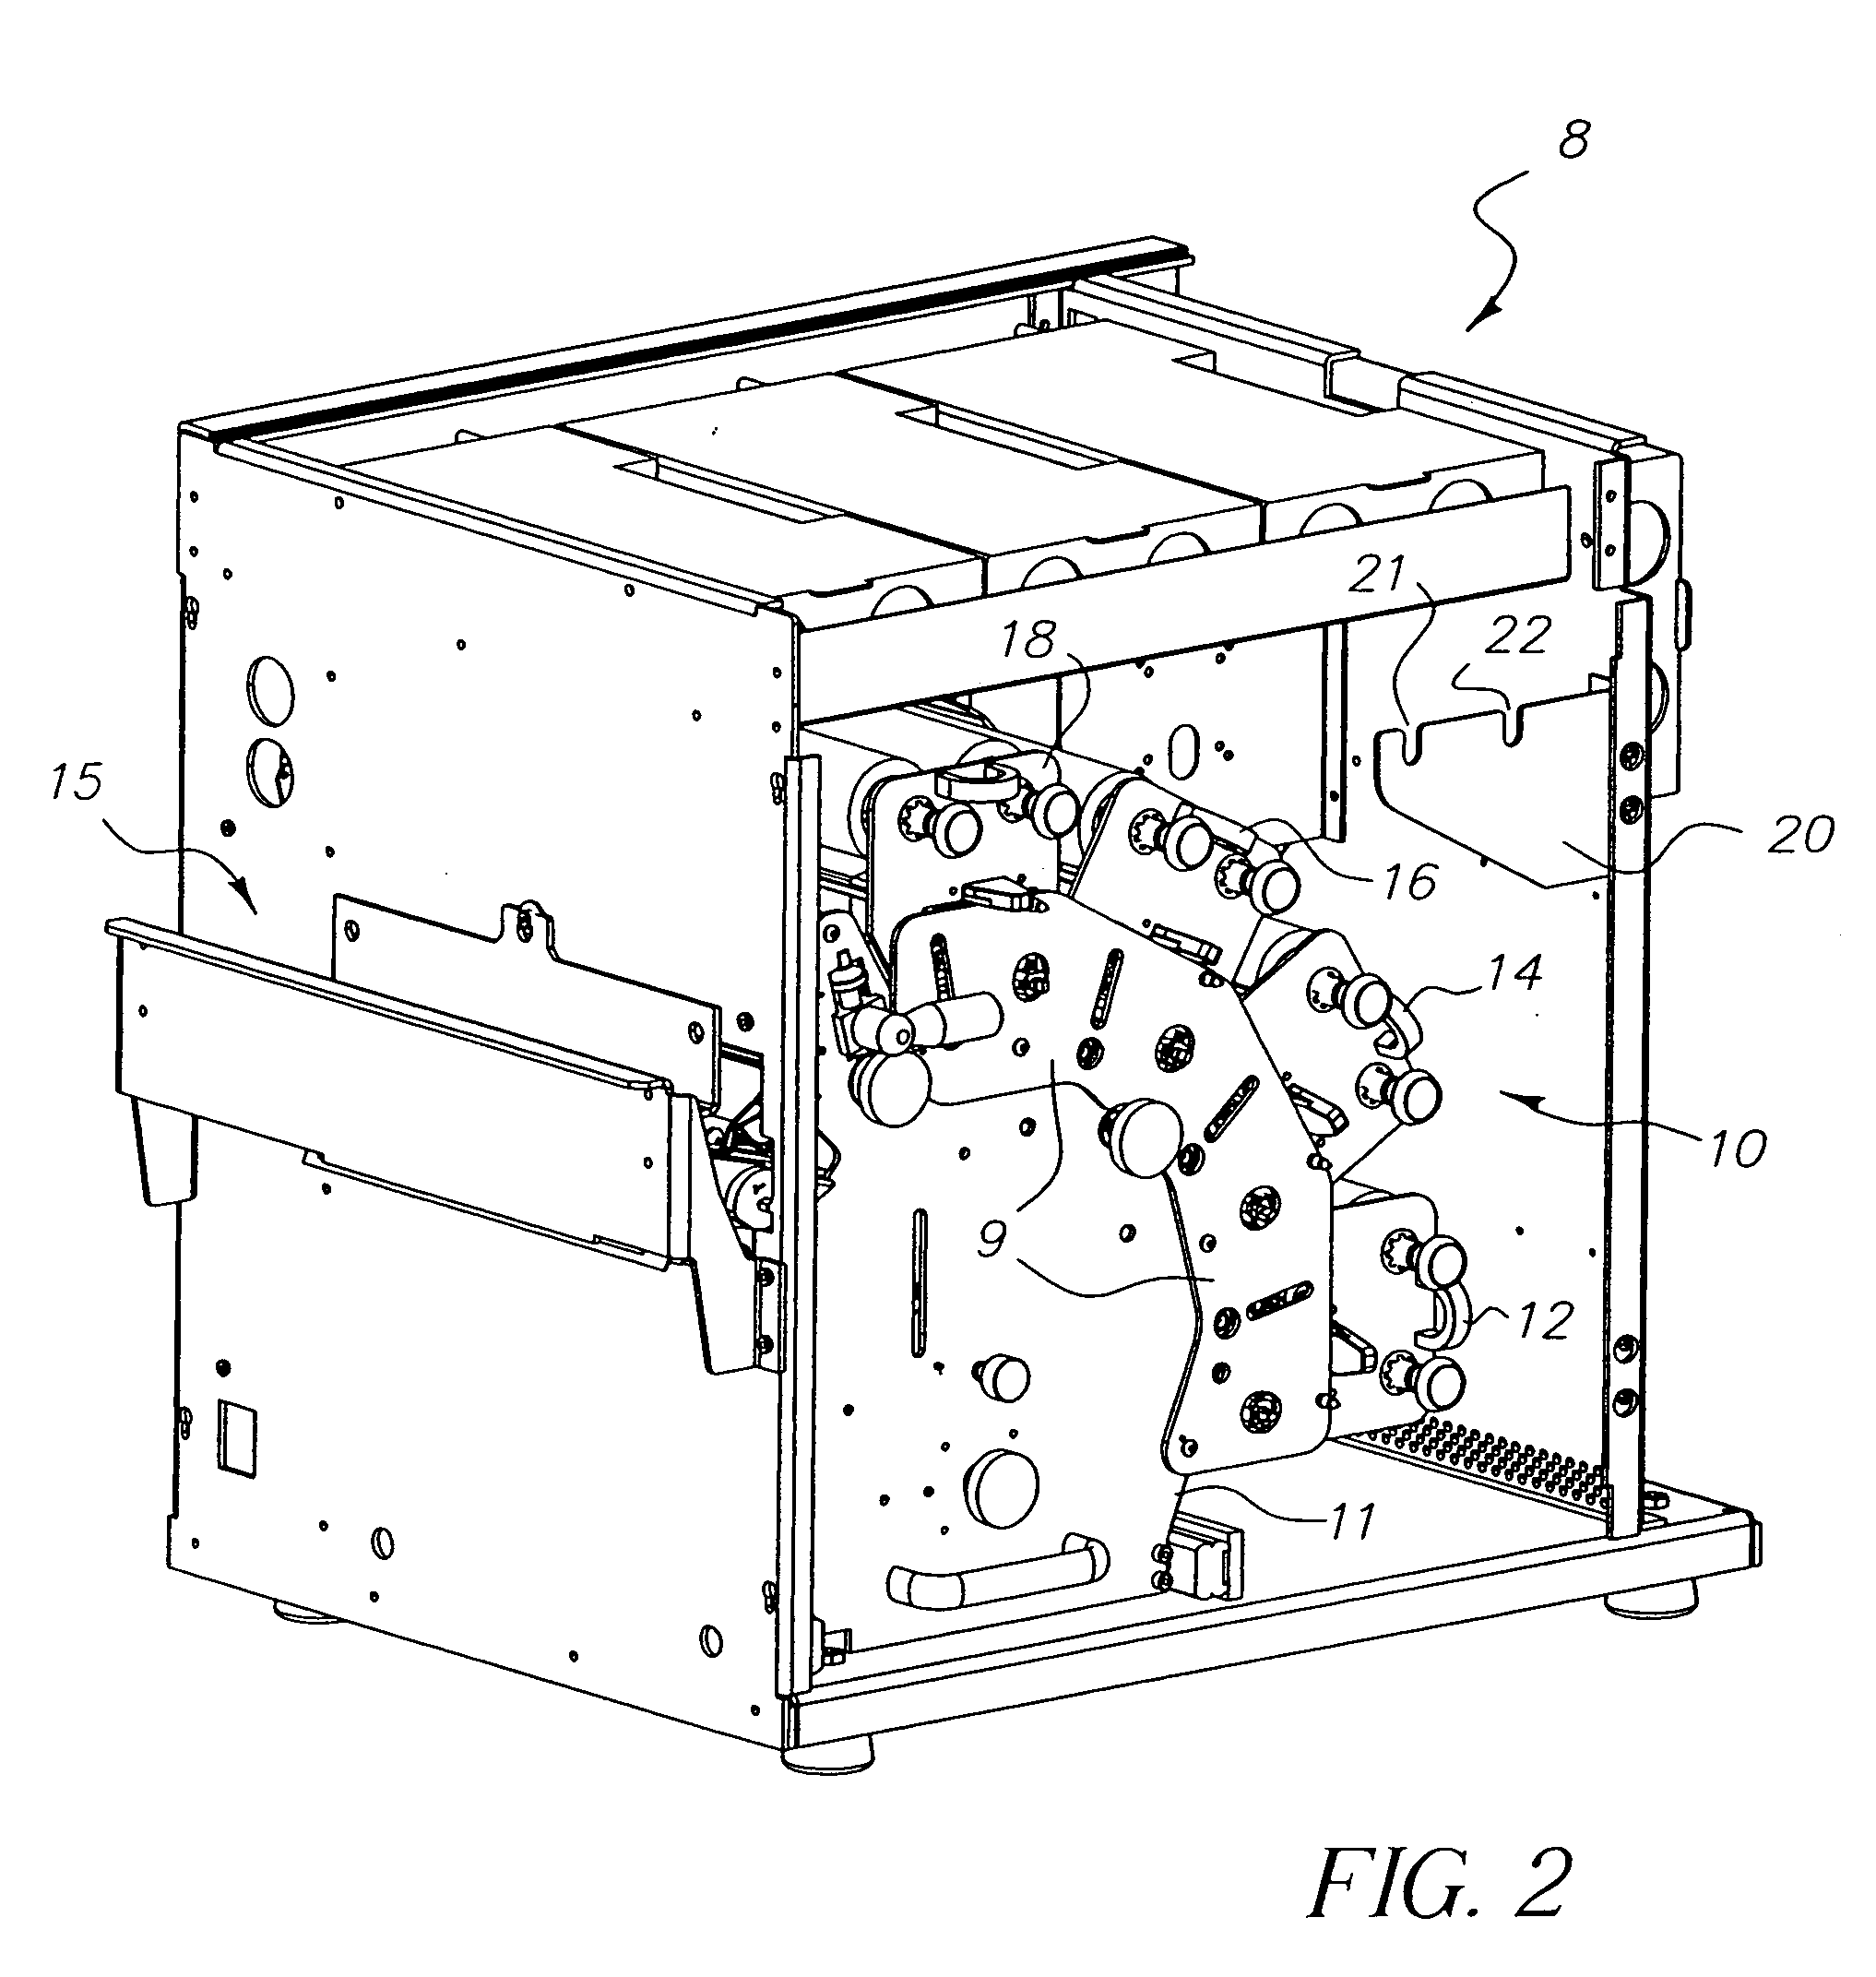 Method and apparatus for image registration improvements in a printer having plural printing stations